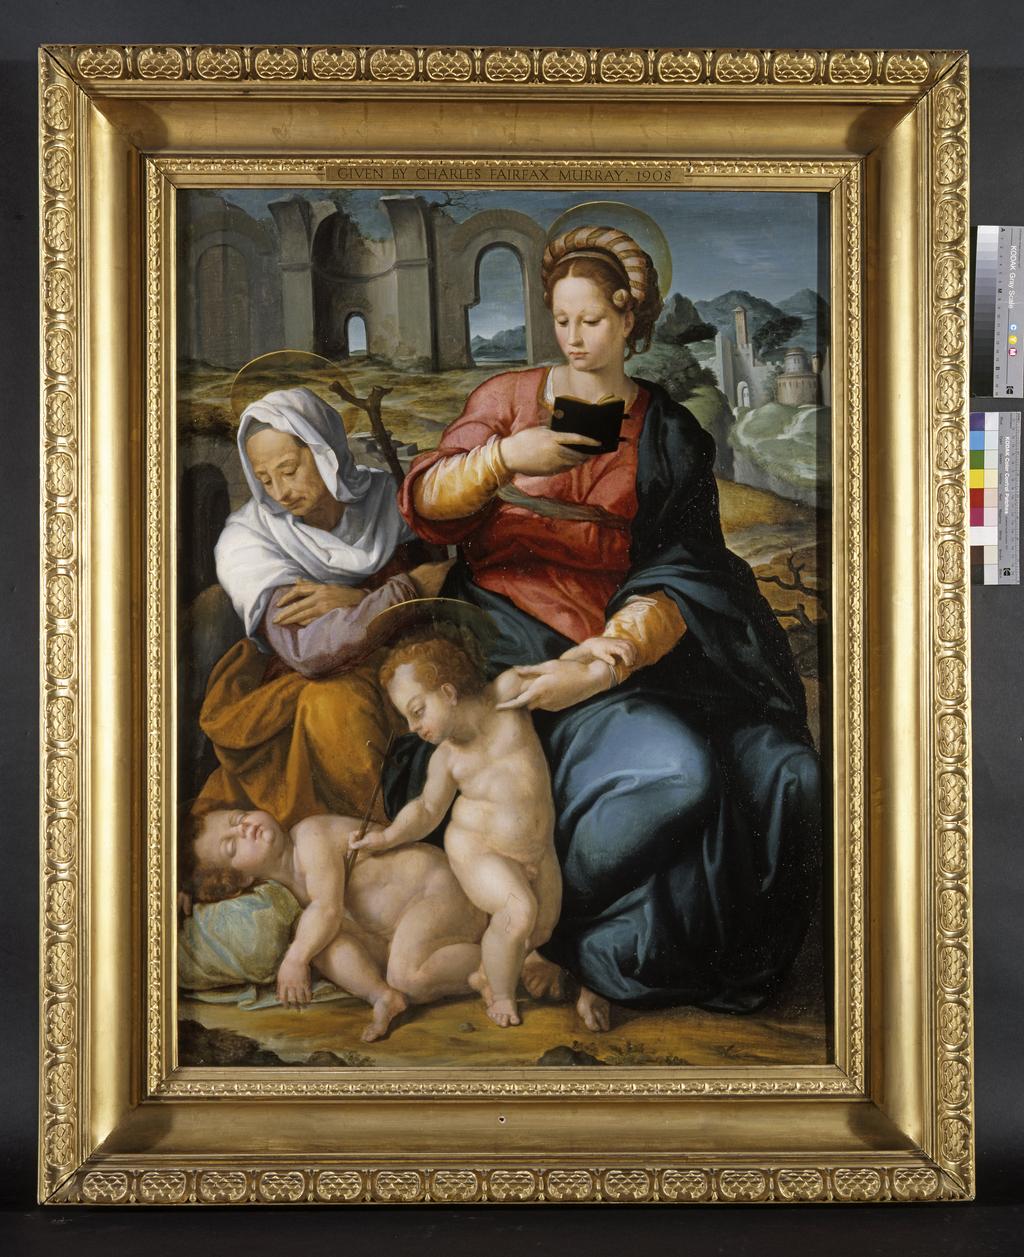 An image of The Virgin and Child with St Elizabeth and the infant Baptist. Jacopino del Conte, attrib. (Italian, 1510-1598). Oil on panel, height, 100.3 cm, width, 76.7 cm, height, frame, 128.7 cm, width, 103.8 cm, depth, 15 cm.  Florentine School.